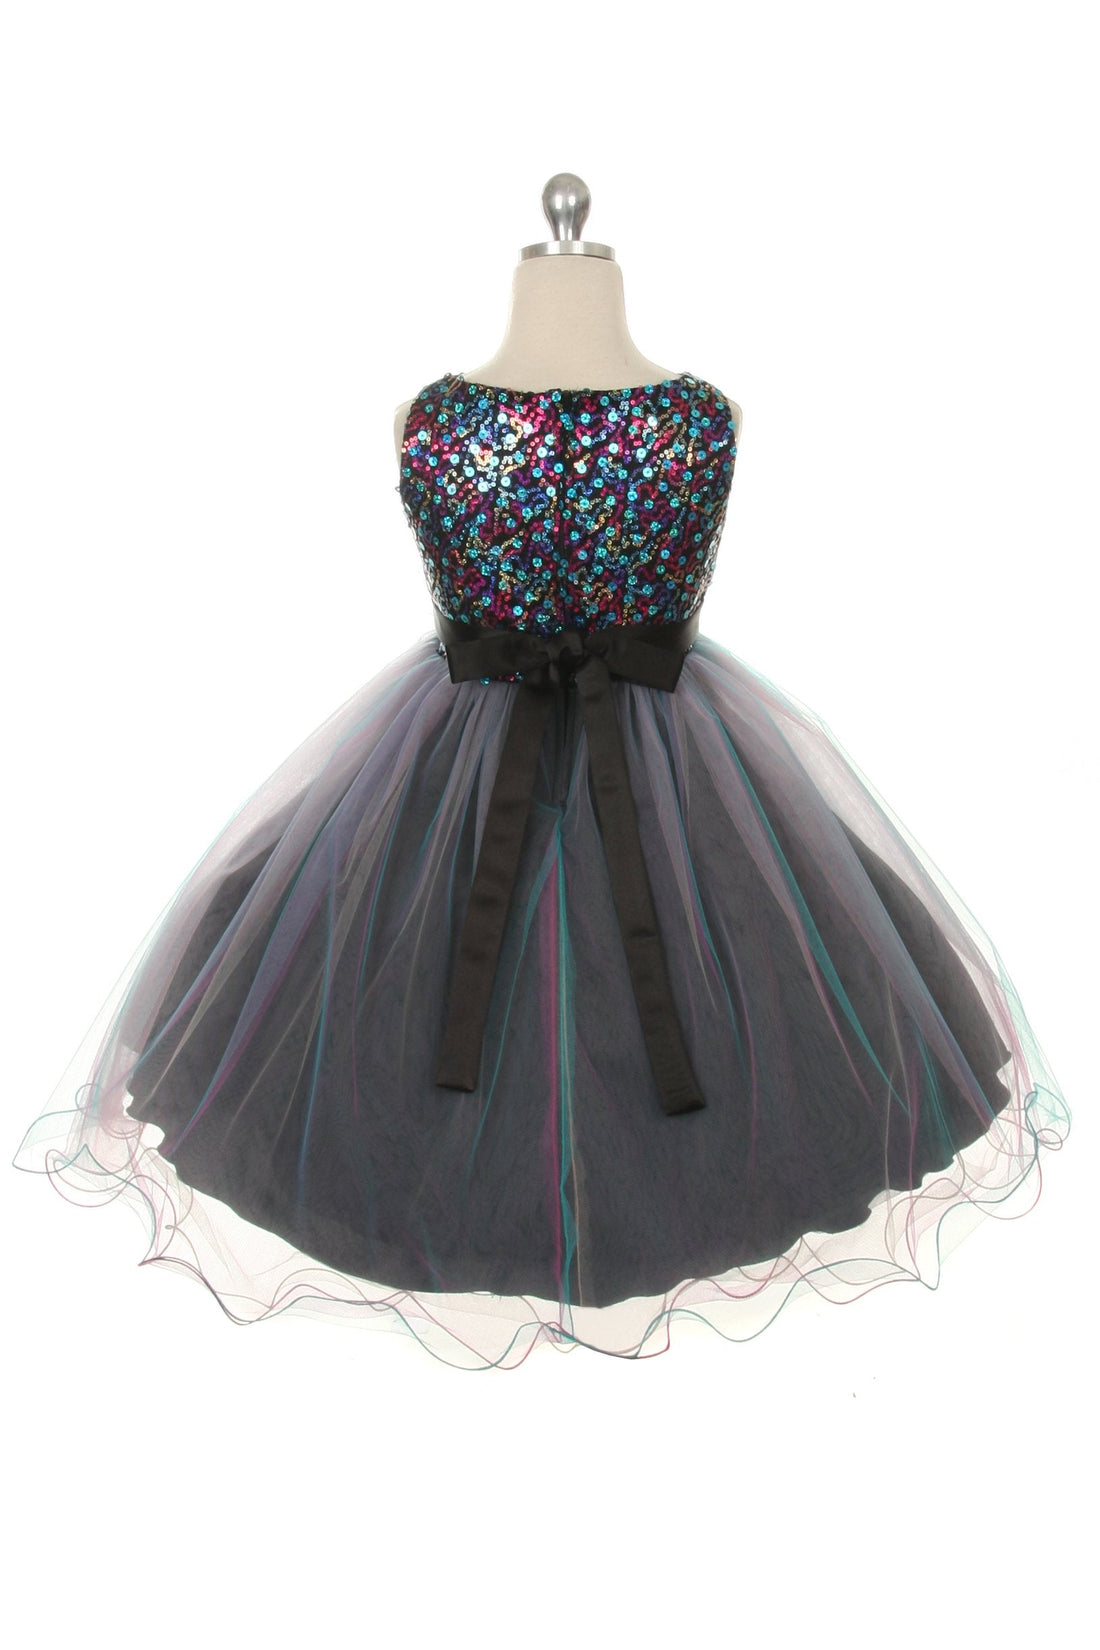 Multi-Sequin Trio Color Tulle Girl Party Dress by AS327 Kids Dream - Girl Formal Dresses